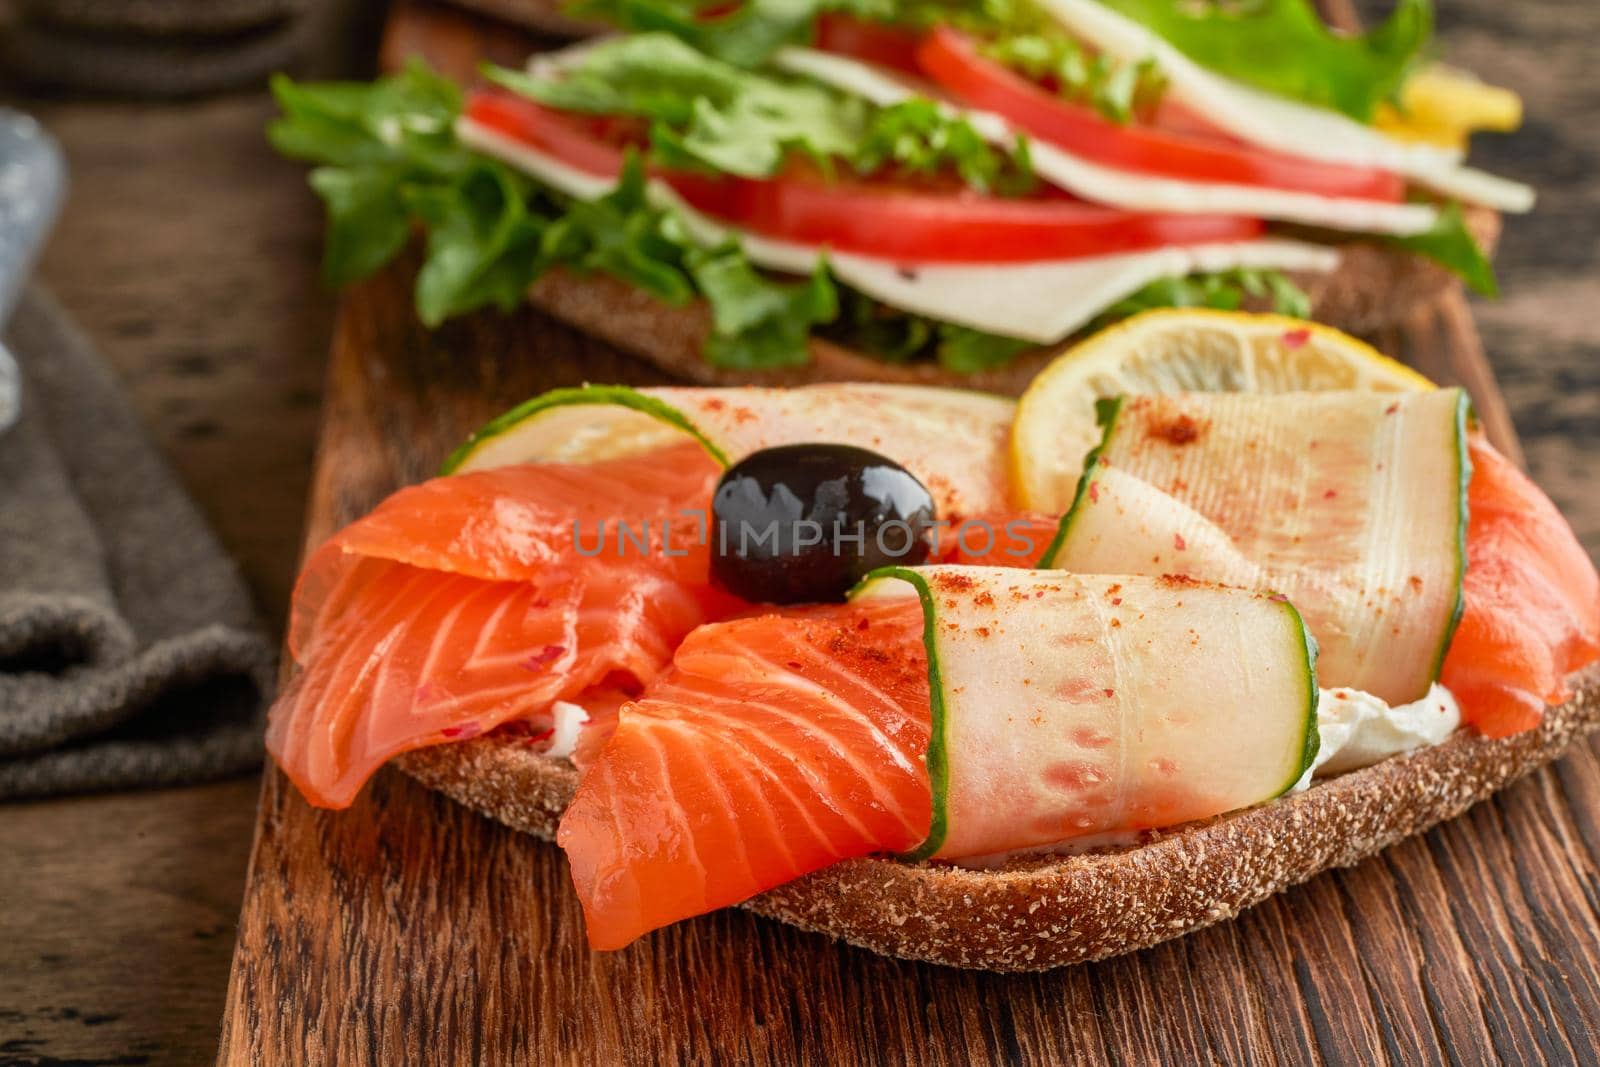 Smorrebrod - traditional Danish sandwiches. Black rye bread with salmon, cream cheese by NataBene